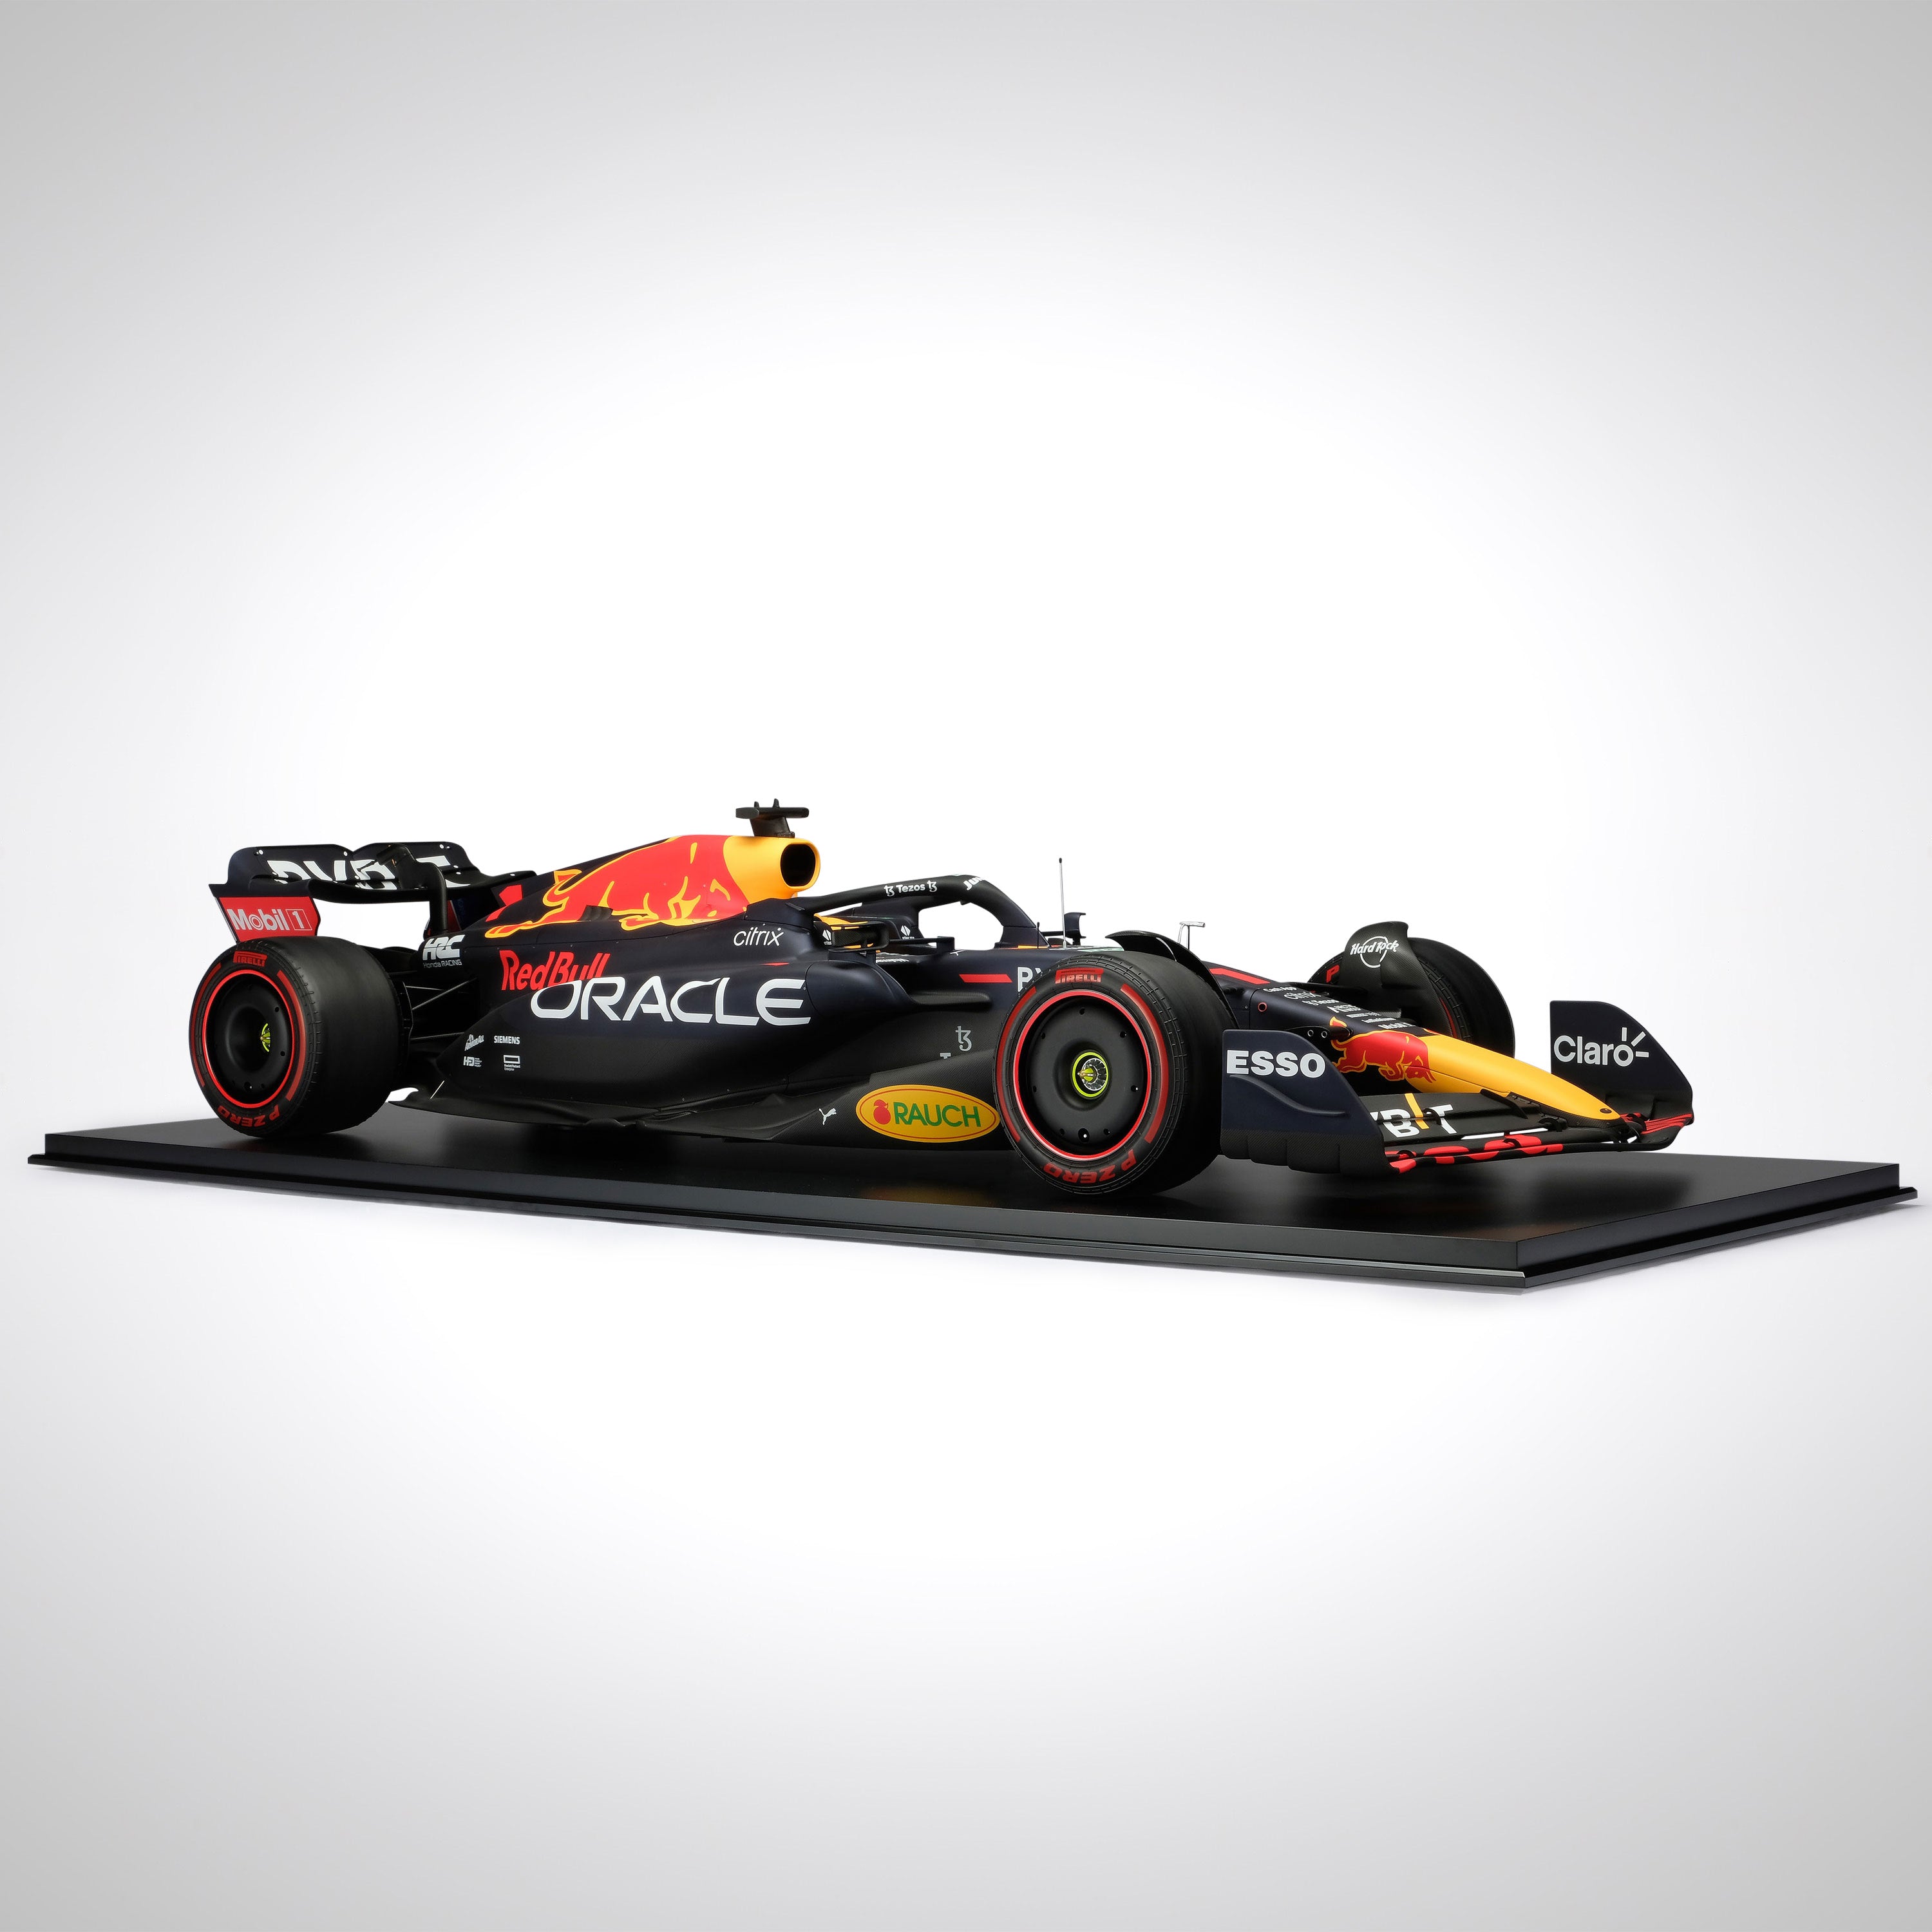 red bull racing shop sale